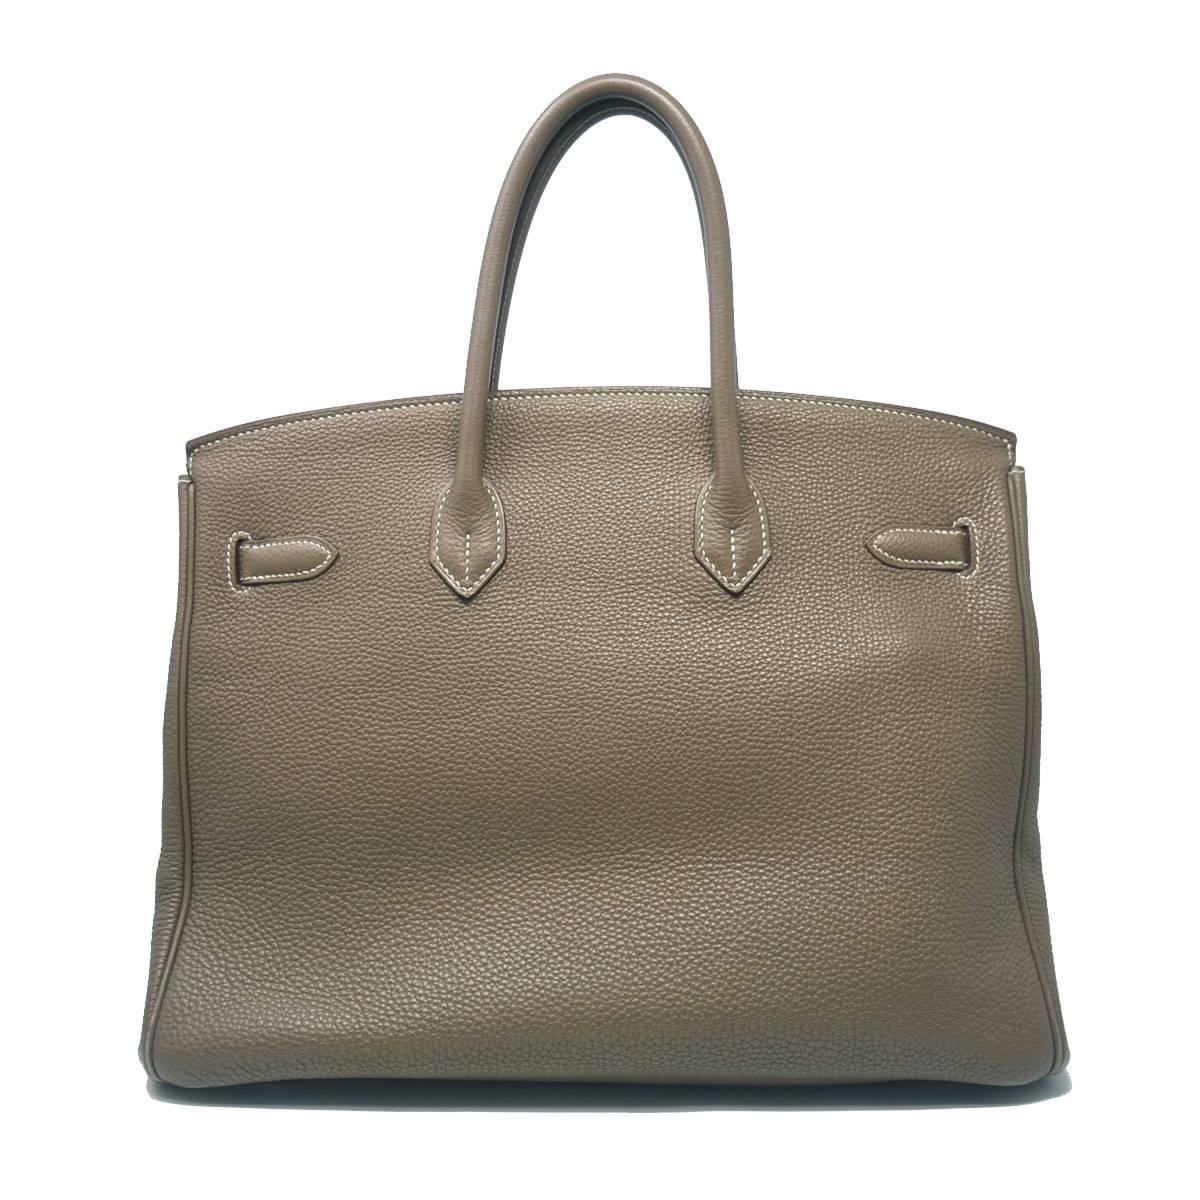 Company-HERMES
Model-Birkin Togo 35
Color-Taupe
Date Code-L
Material-Leather
Measurements-13.5